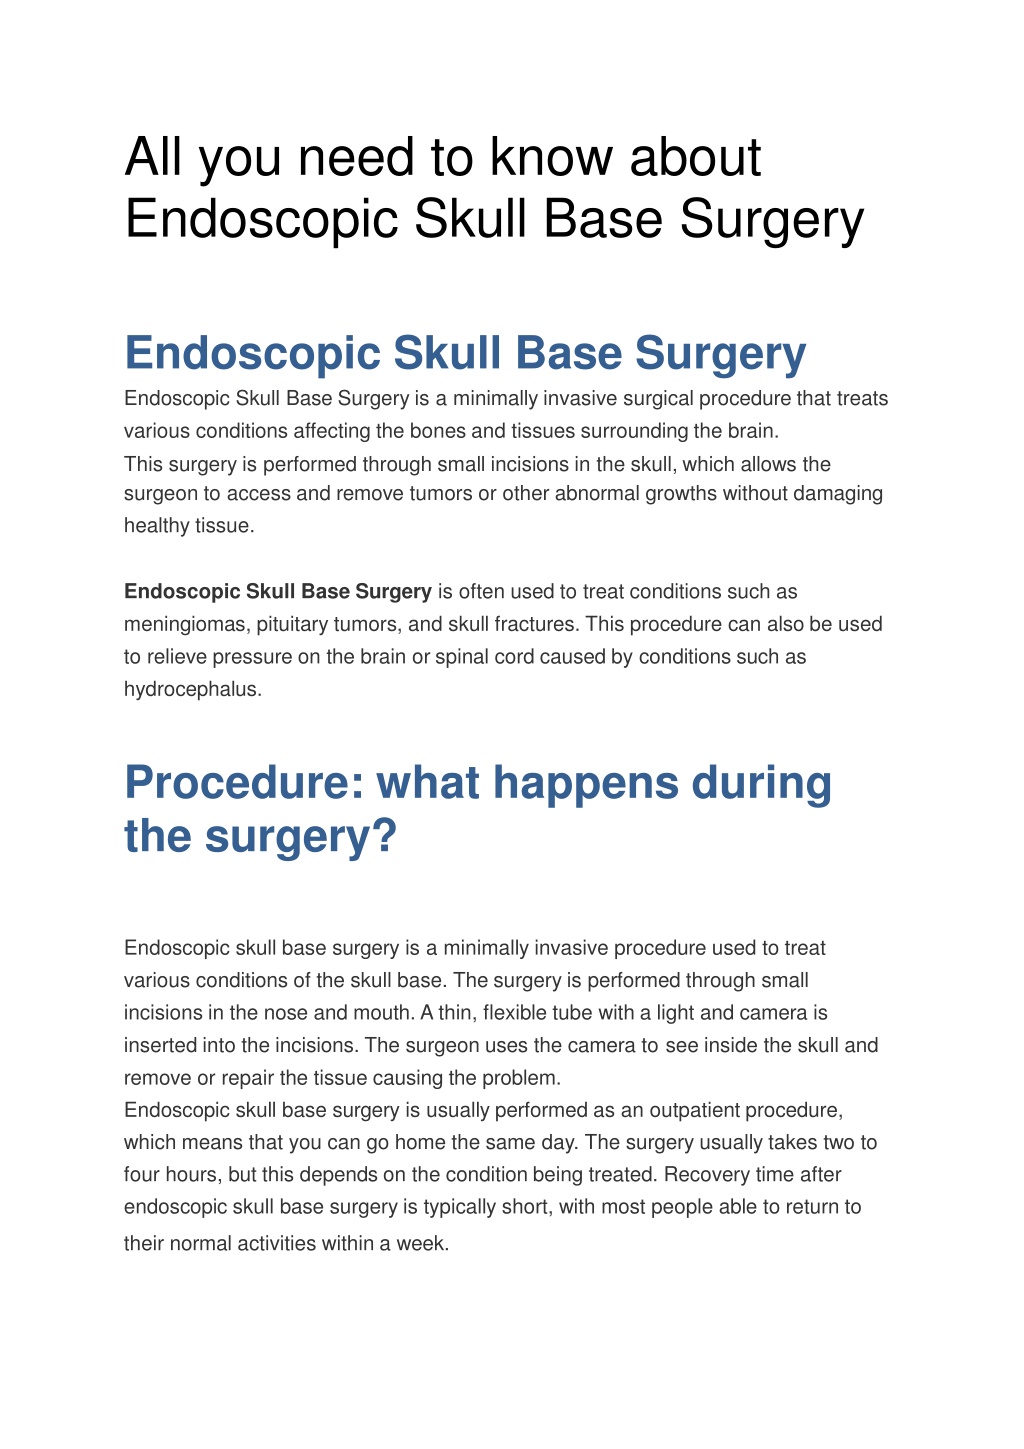 Ppt All You Need To Know About Endoscopic Skull Base Surgery Powerpoint Presentation Id11686586 3375